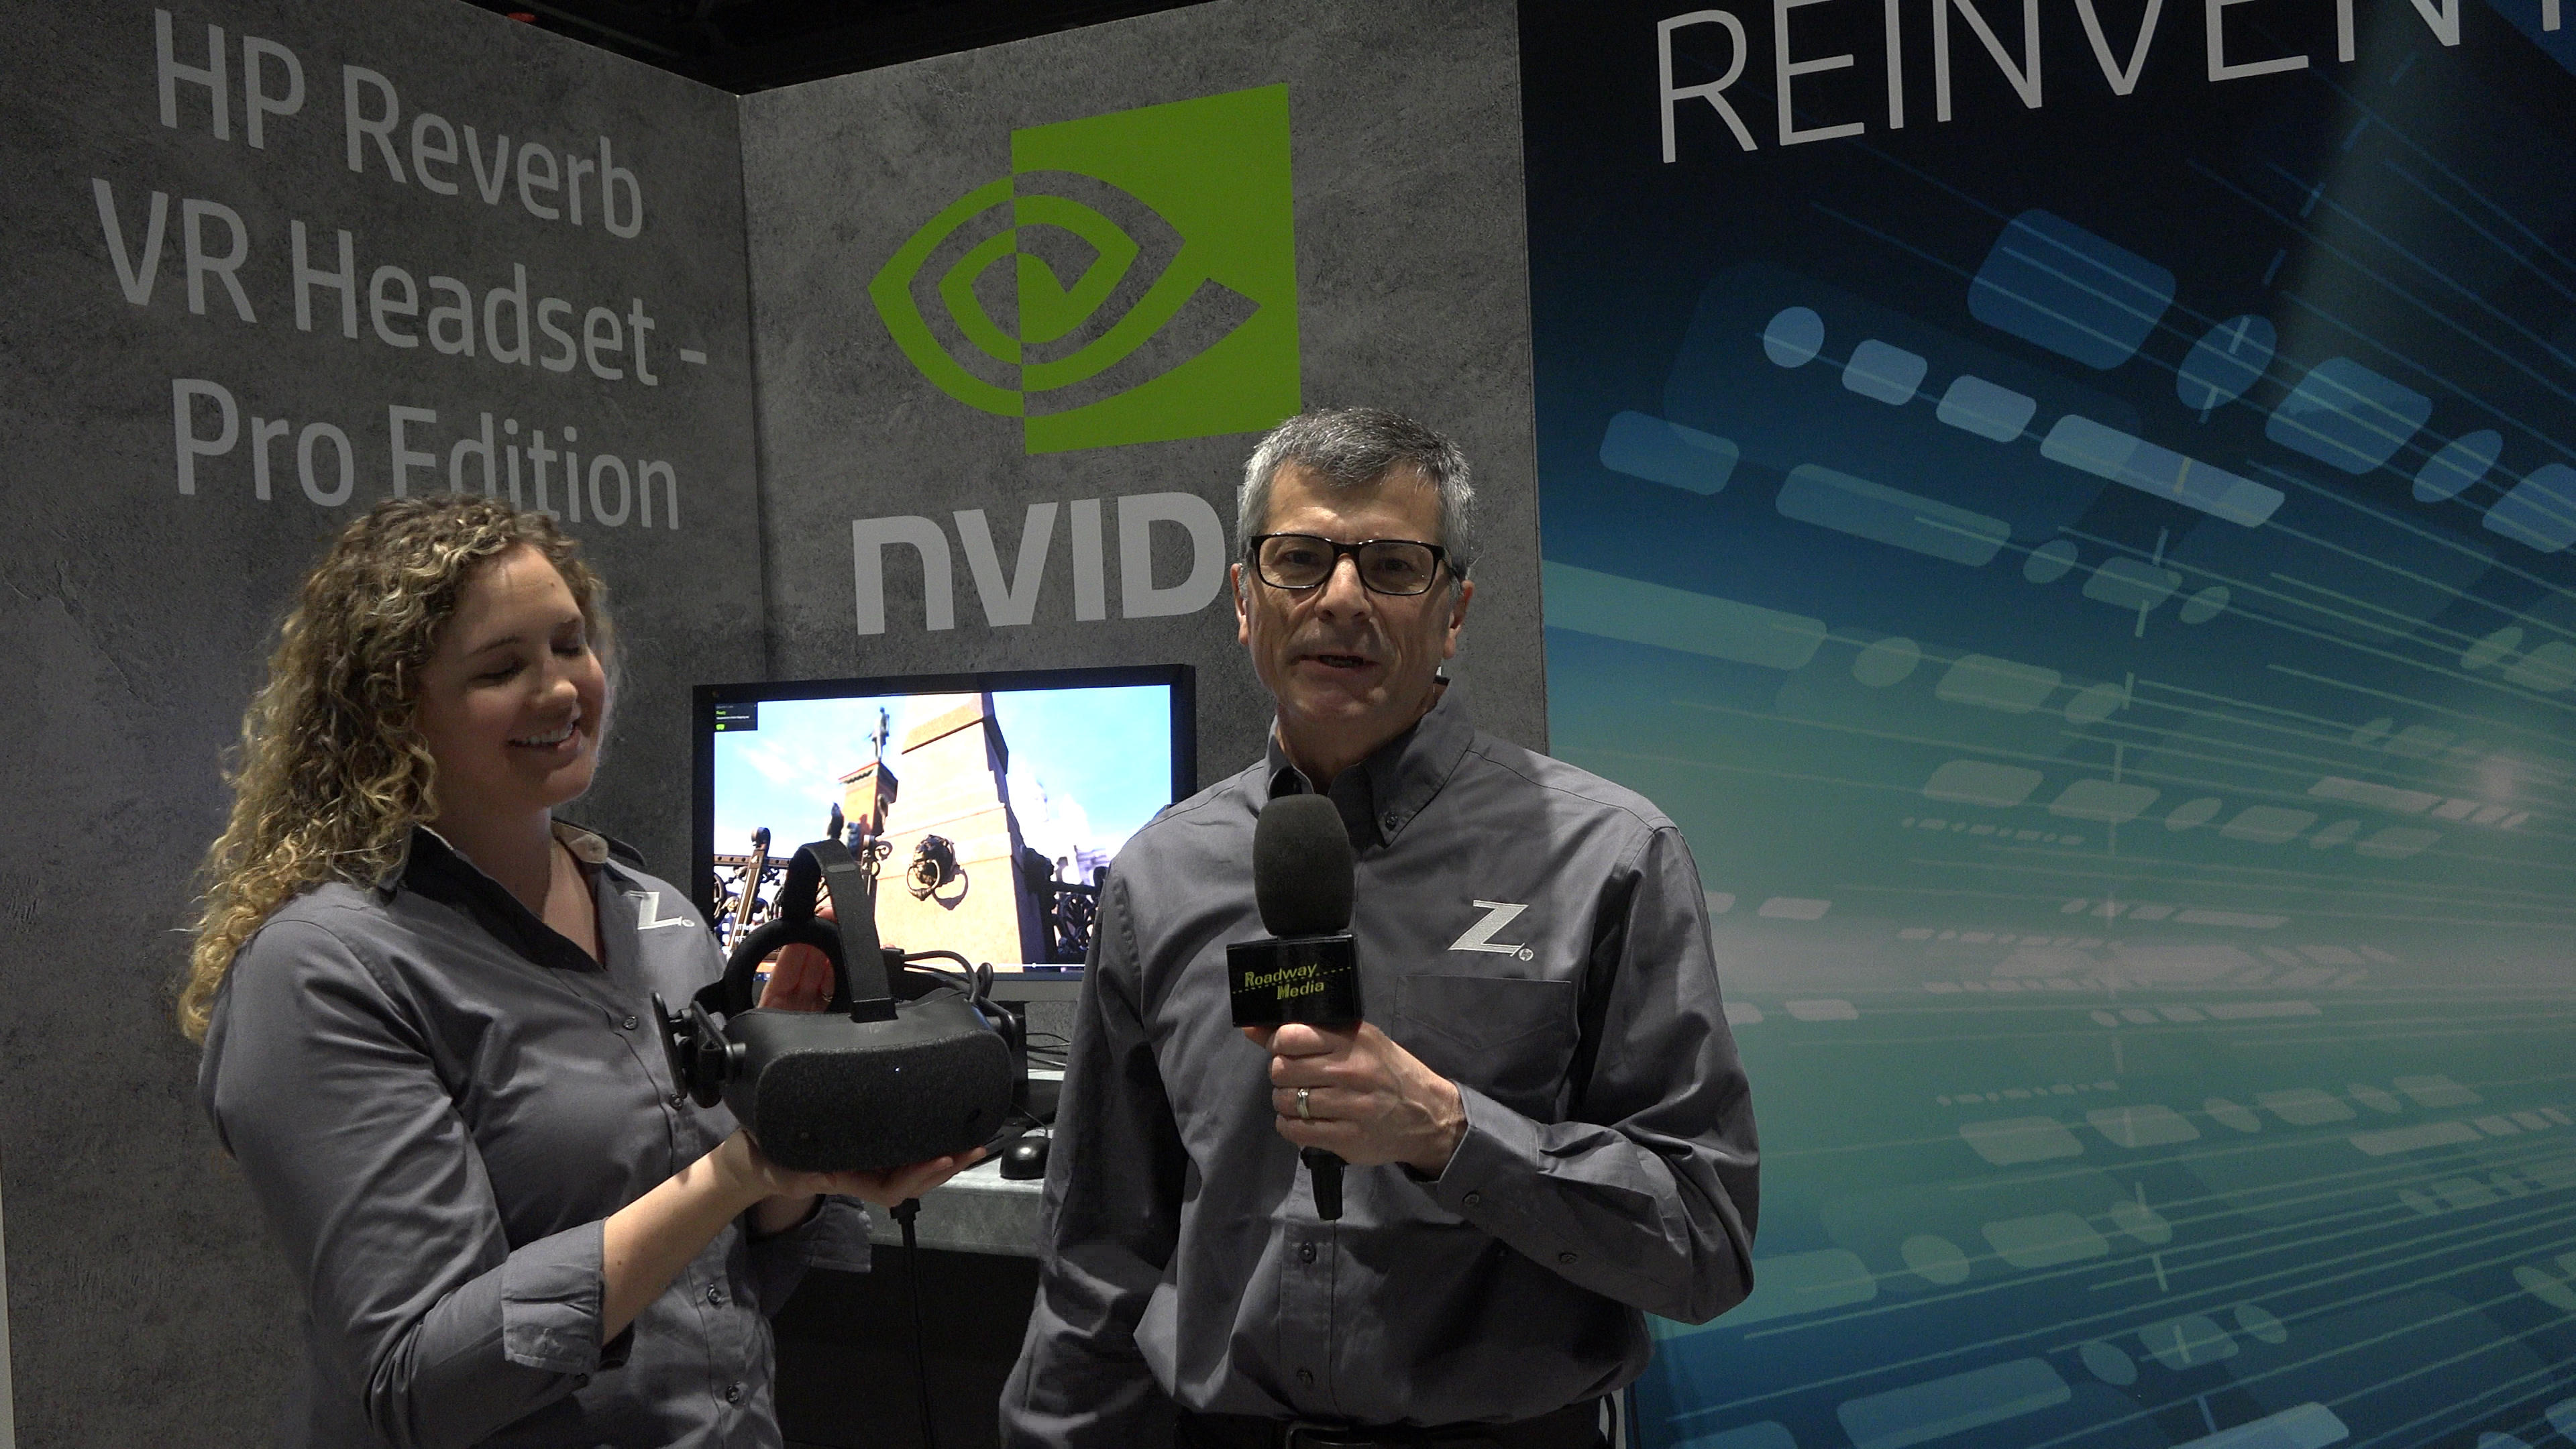 HP presents Data Science Workstation and new VR Headset at GTC 2019